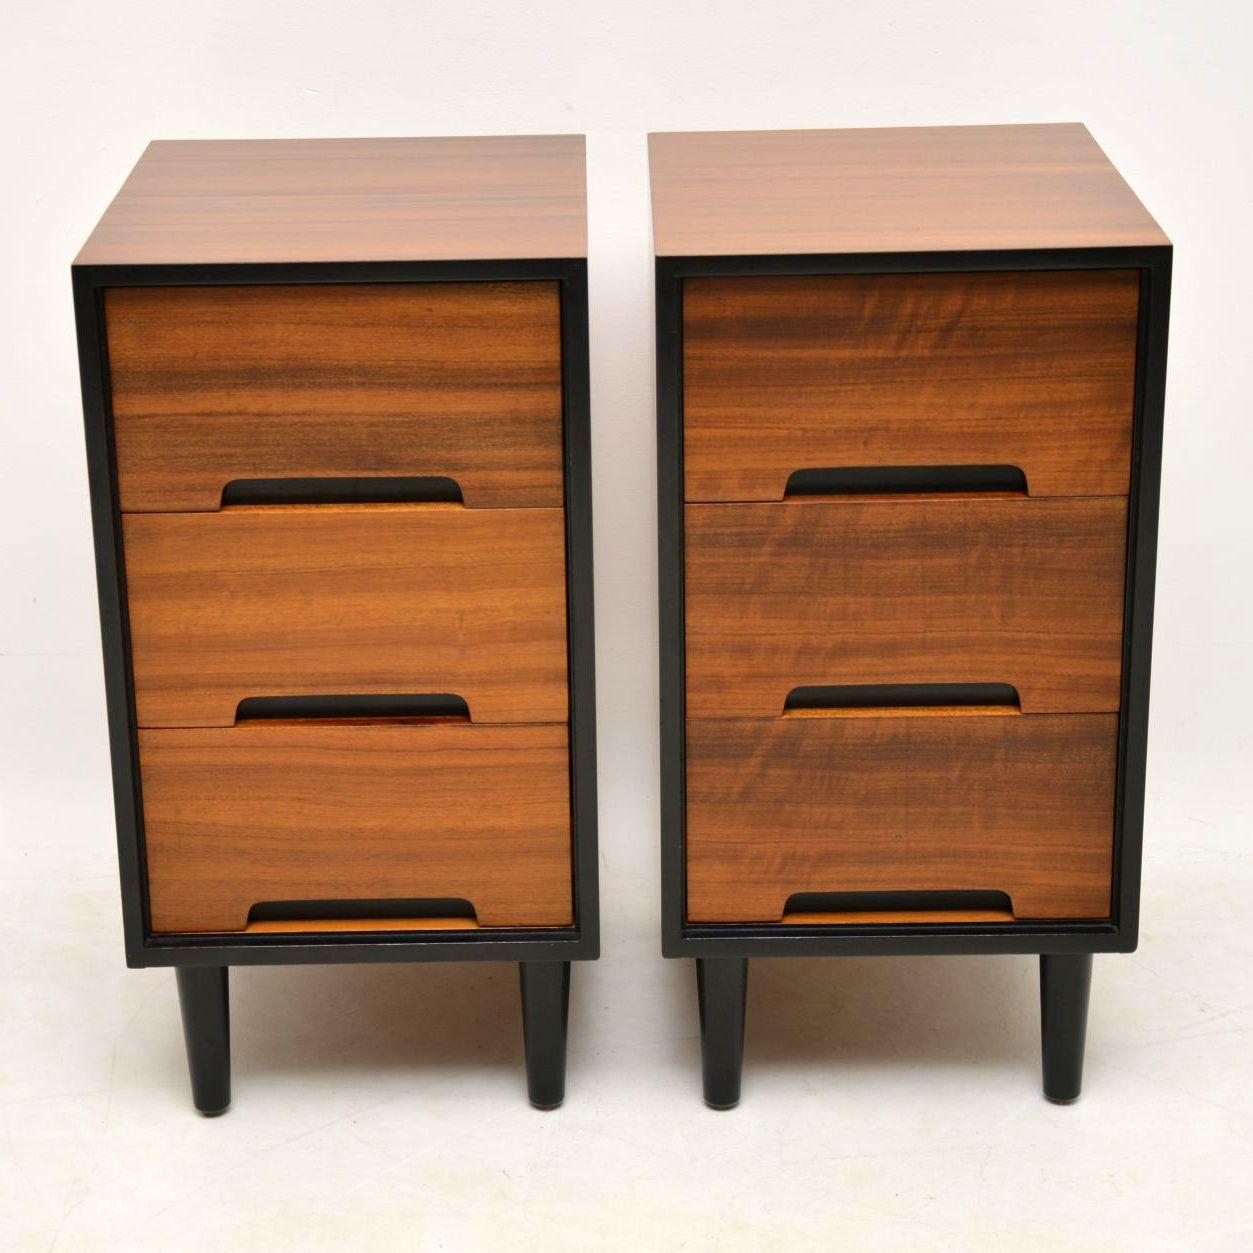 Mid-Century Modern 1950s Pair of Walnut Bedside Chests by John & Sylvia Reid for Stag